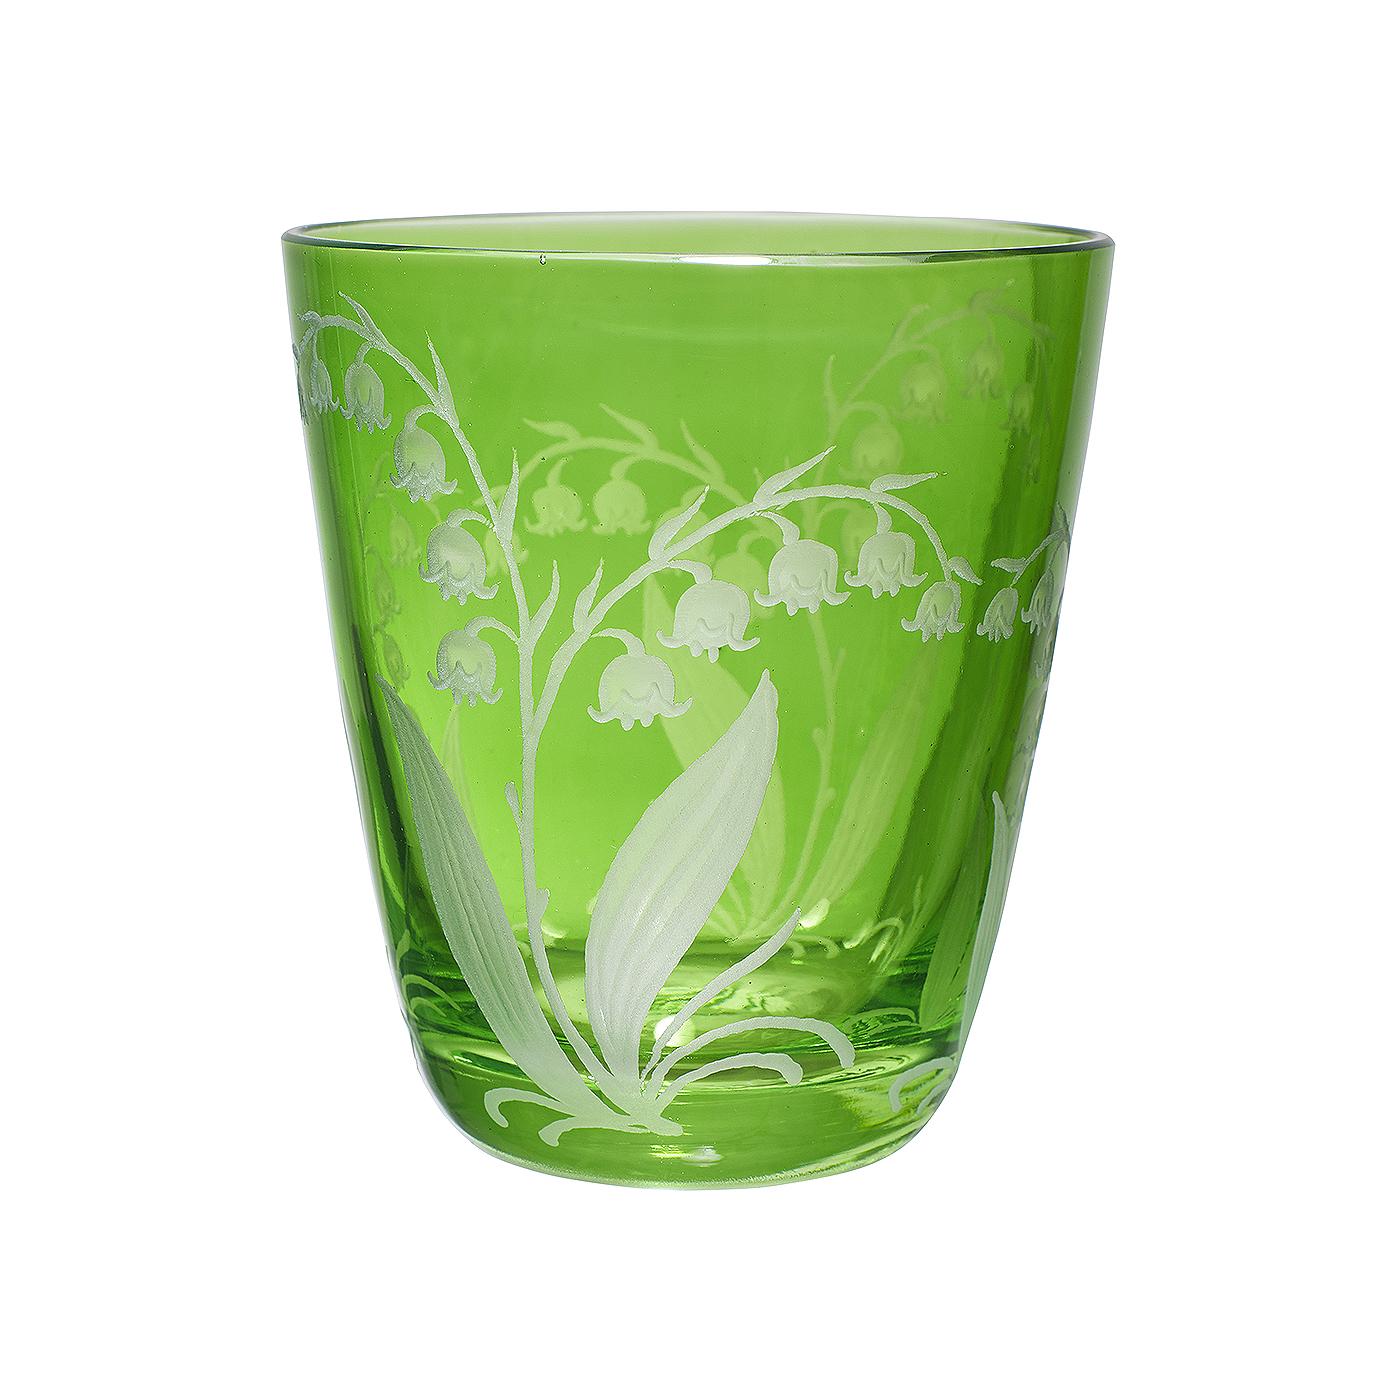 Set of six hand blown tumbler in green crystal with a hand-edged country style decor. The decor shows a hand-engraved decor lily of the valley all-over the glass. Handmade in Bavaria/Germany. Can be ordered in different colors like pink, green and